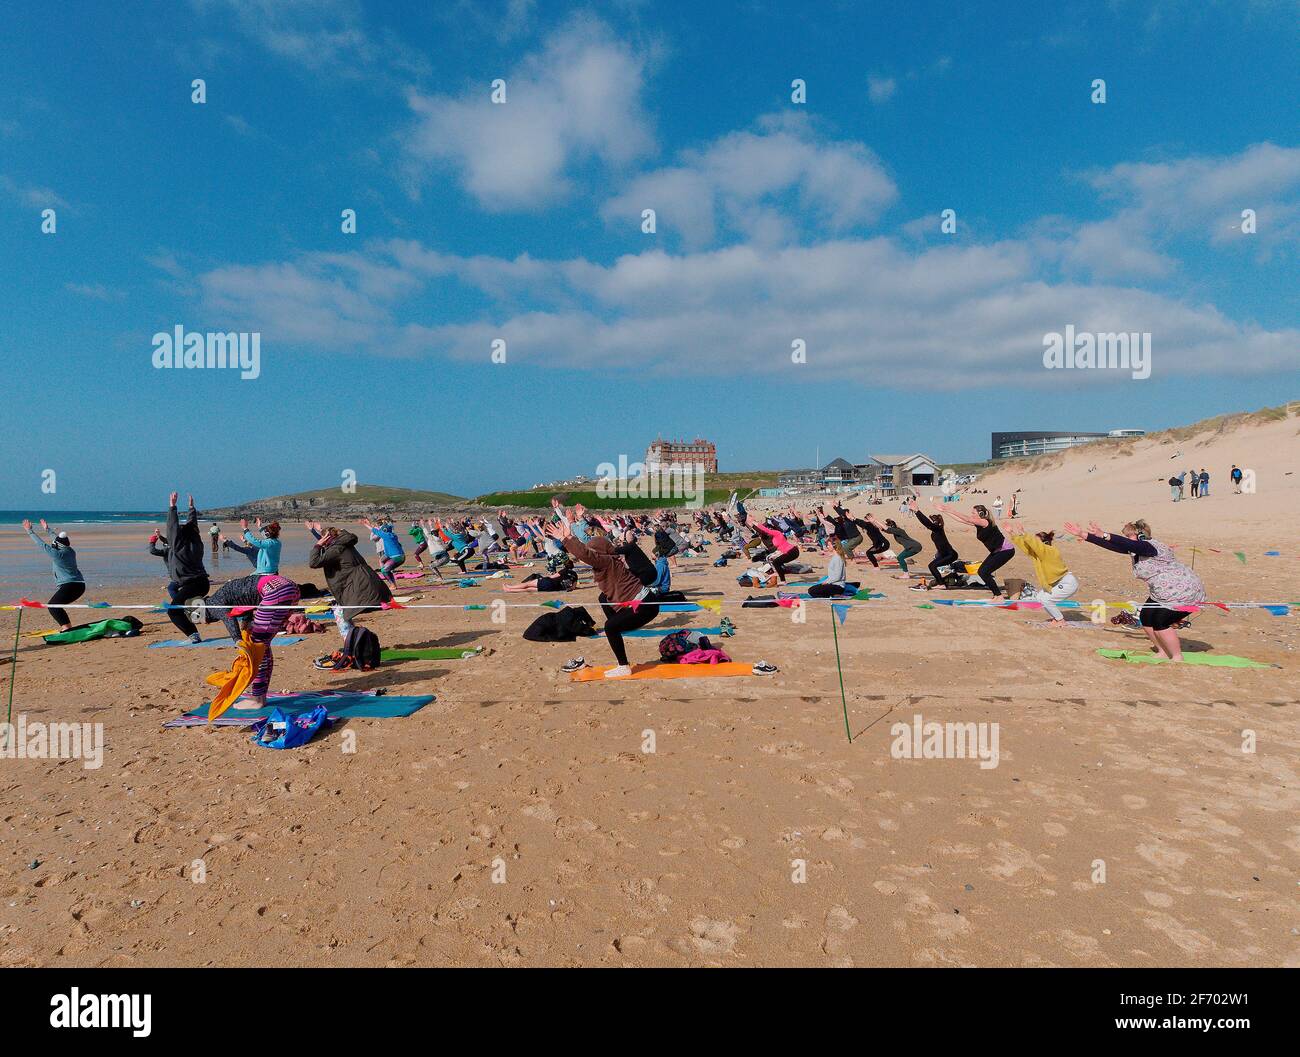 Newquay, Cornwall, England, 3rd  April 2021. UK weather: Cool with sunshine for a mass Yoga class involving 300 plus participants. Silent disco yoga organised by Anthony Durkin DJ in combination with Oceanflow yoga. Fistral beach. Credit: Robert Taylor/Alamy Live News� Stock Photo